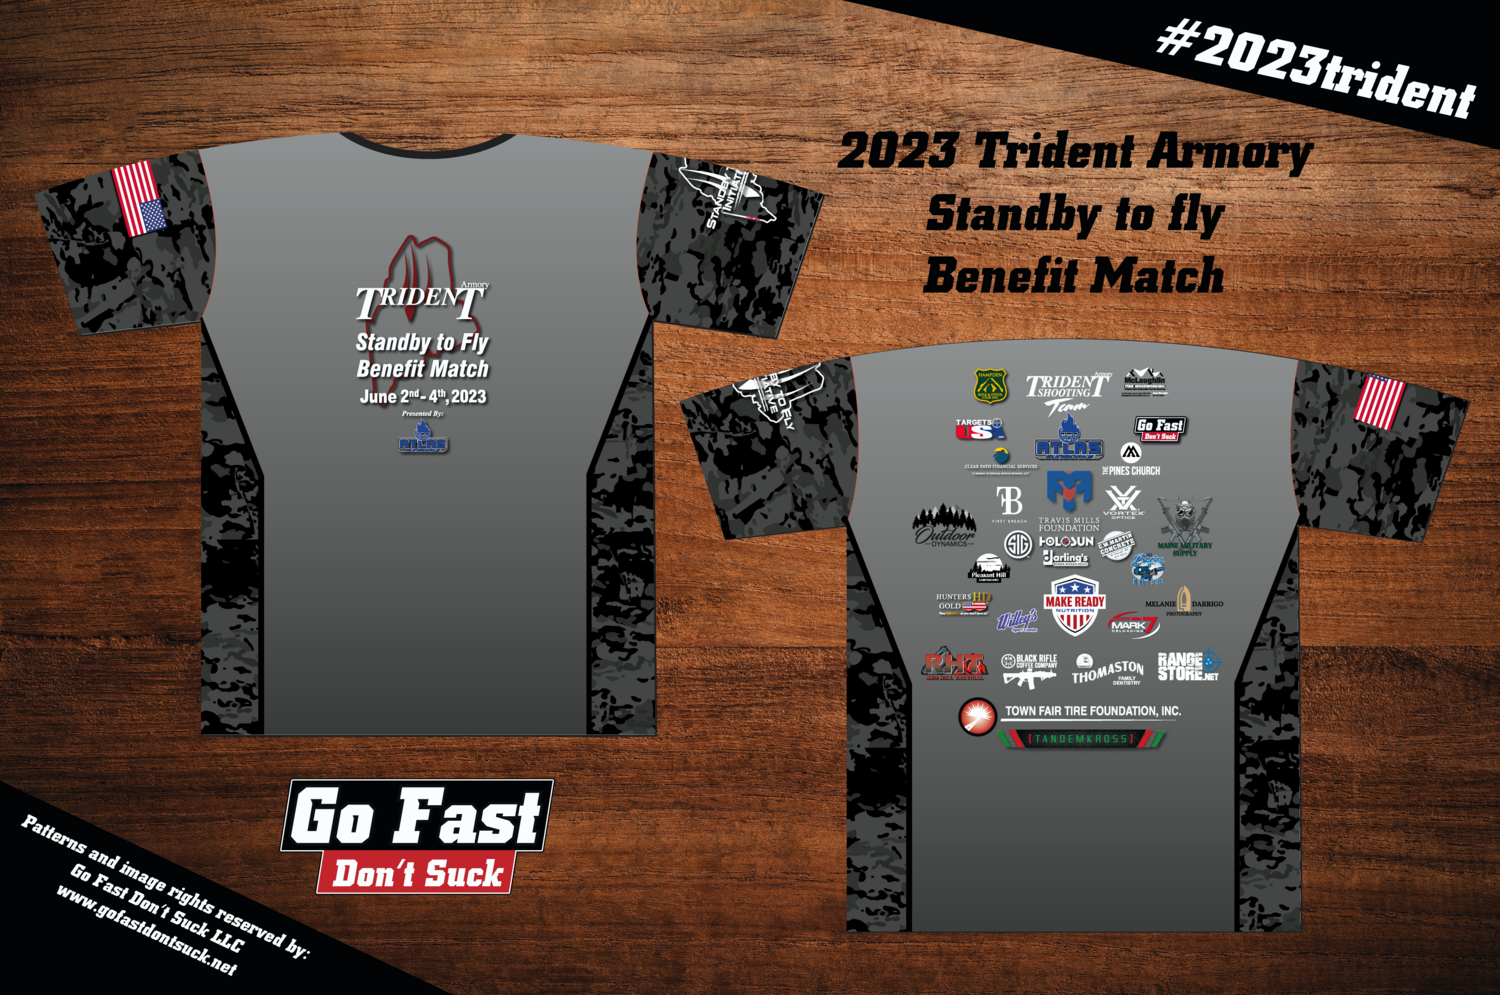 2023 Trident Armory Standby to Fly Benefit Match - Crew Neck Jersey.